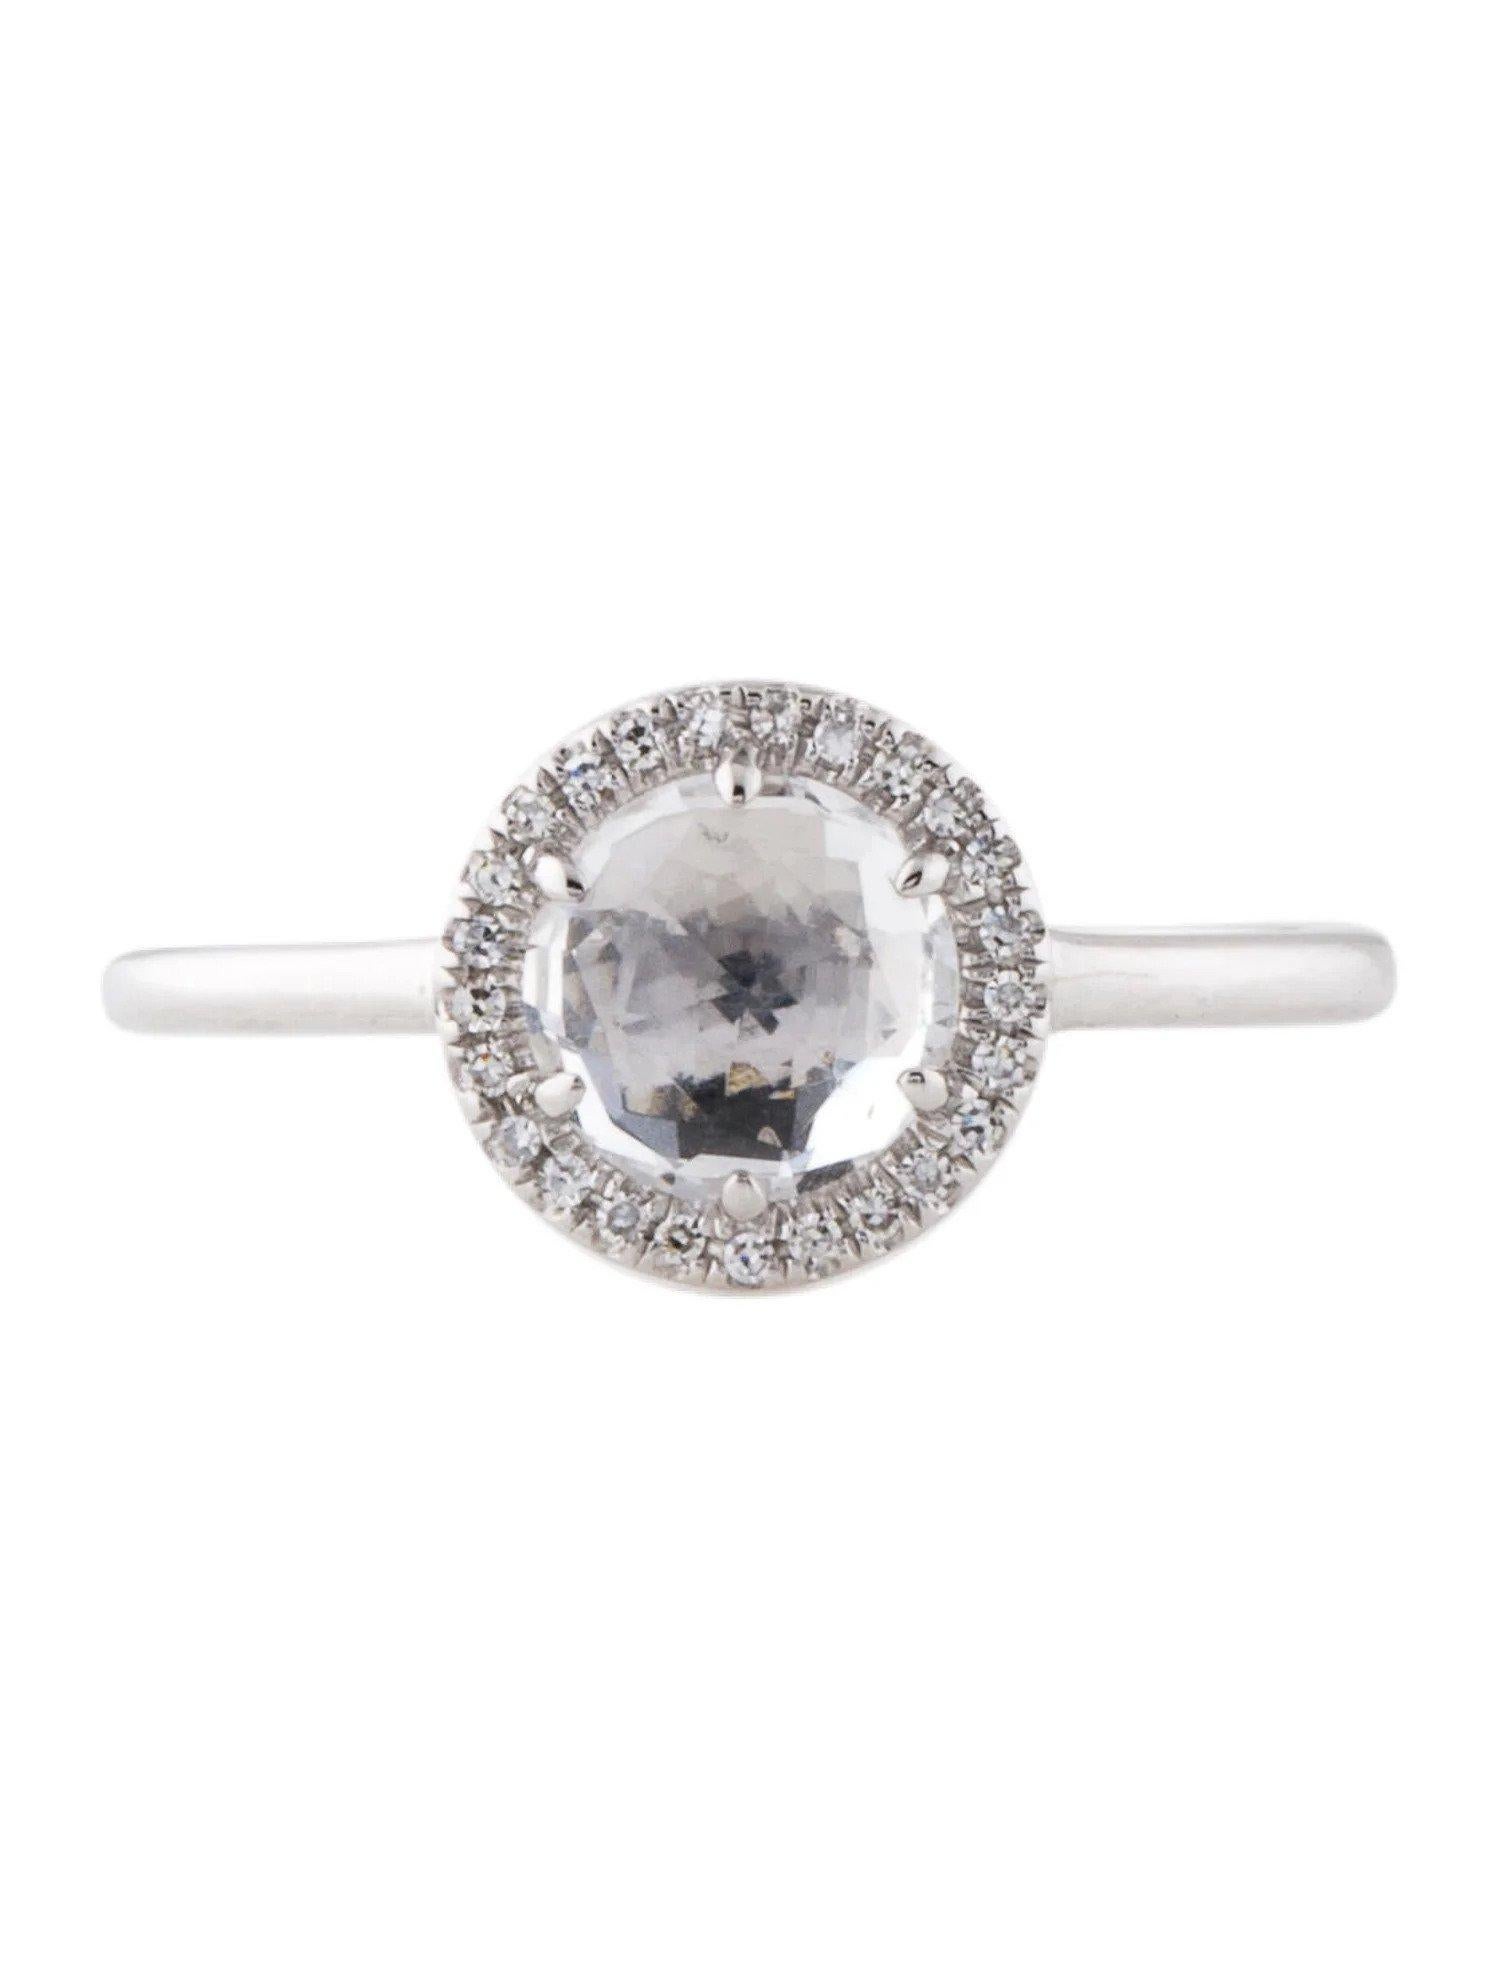 This White Topaz & Diamond Ring is a stunning and timeless accessory that can add a touch of glamour and sophistication to any outfit. 

This ring features a 1.37 Carat Round White Topaz, with a Diamond Halo comprised of 0.06 Carats of Single Cut